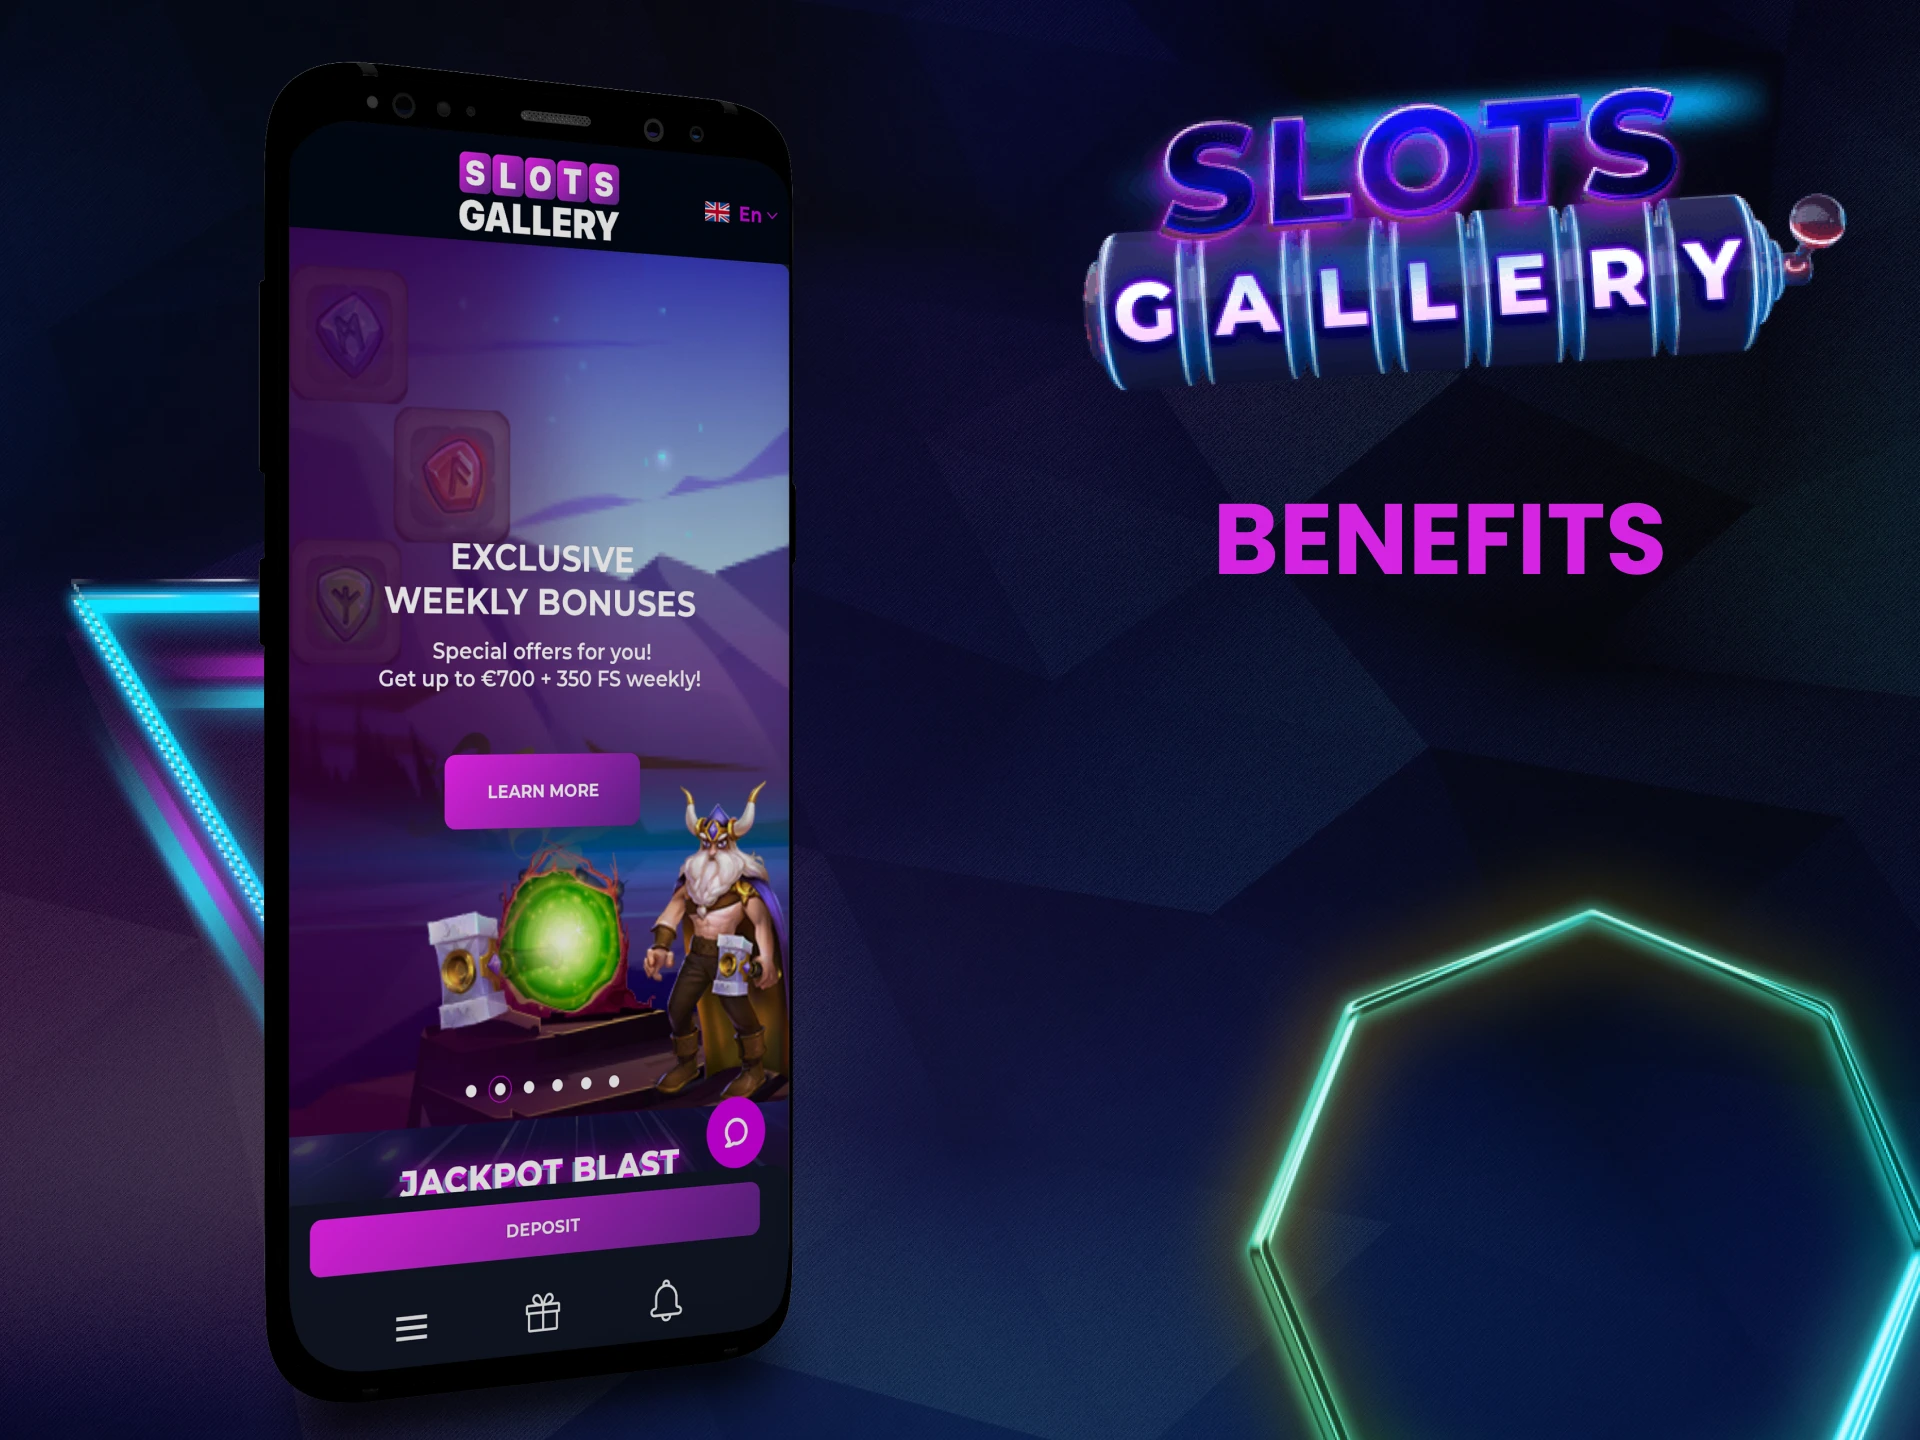 We will tell you about the advantages of the SlotsGallery application.